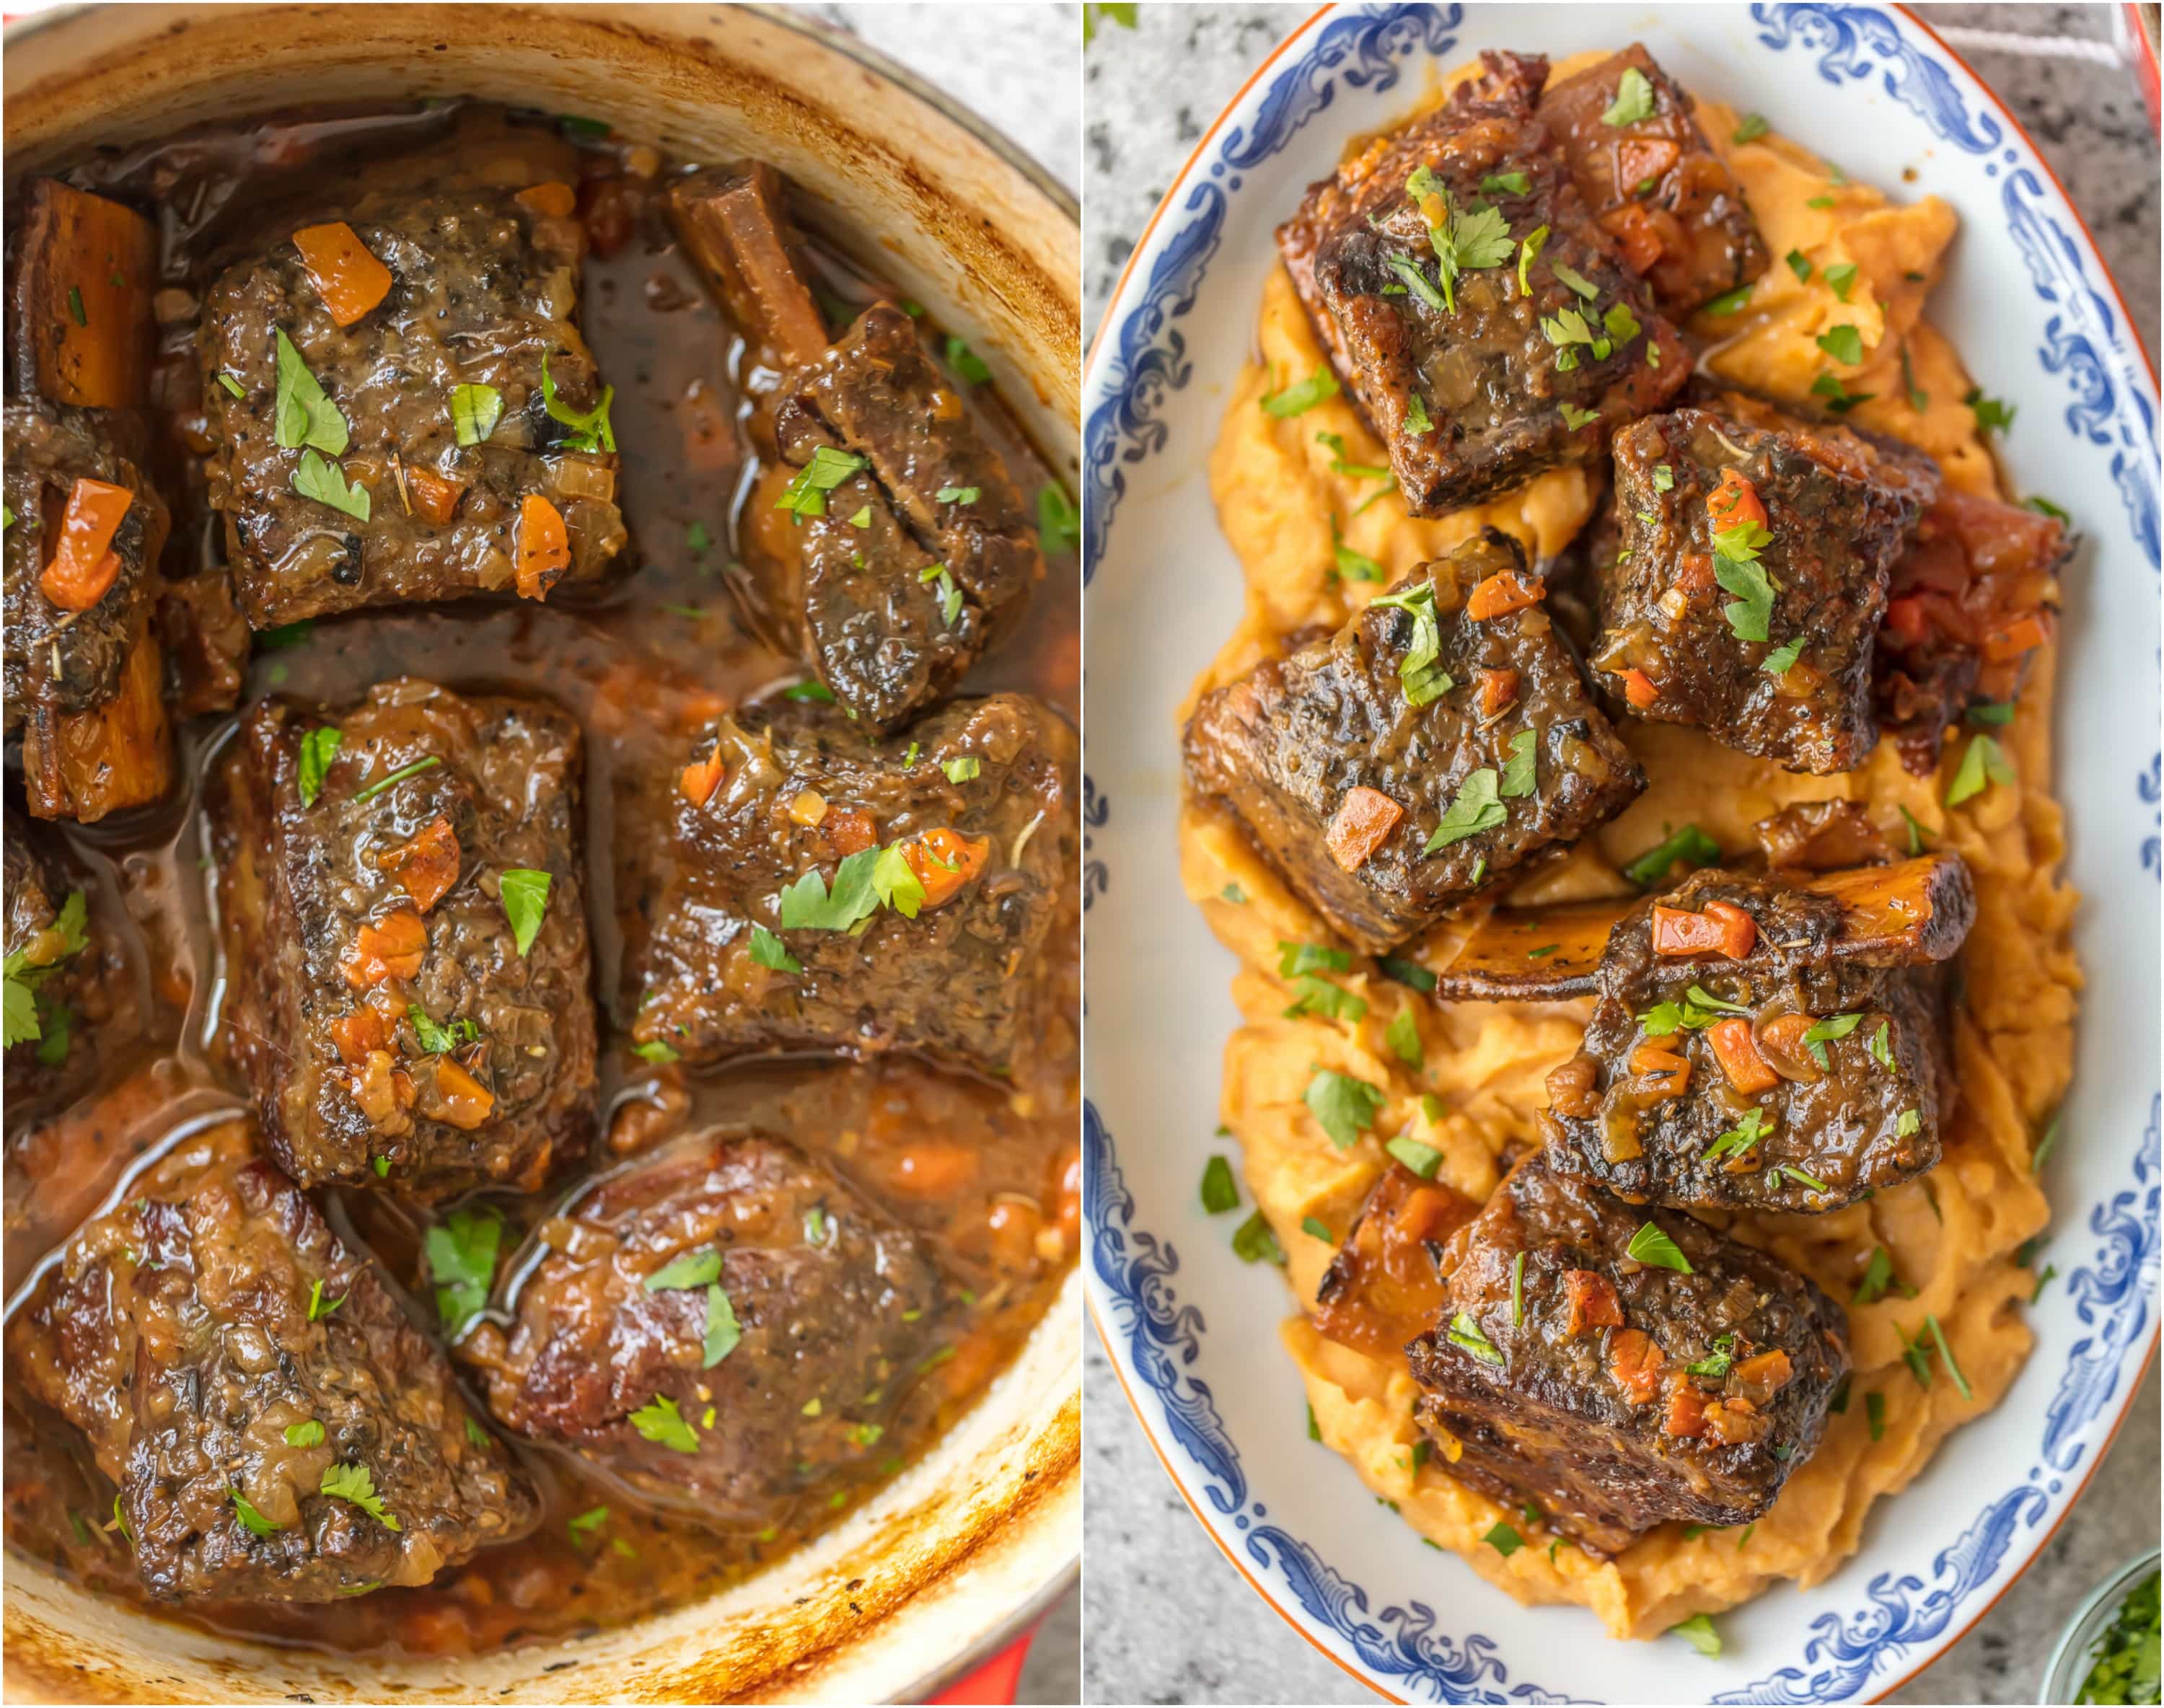 This Short Ribs Recipe (Honey Bourbon Dutch Oven Short Ribs) has quickly become one of our favorite dutch oven recipes! Short Ribs are the kind of comfort food I crave on the regular. I love the fall off the bone flavor, especially with this Honey Bourbon Sauce! If you've never made Short Ribs in your Oven, you're missing out. These are the most tender Short Ribs you will ever taste!